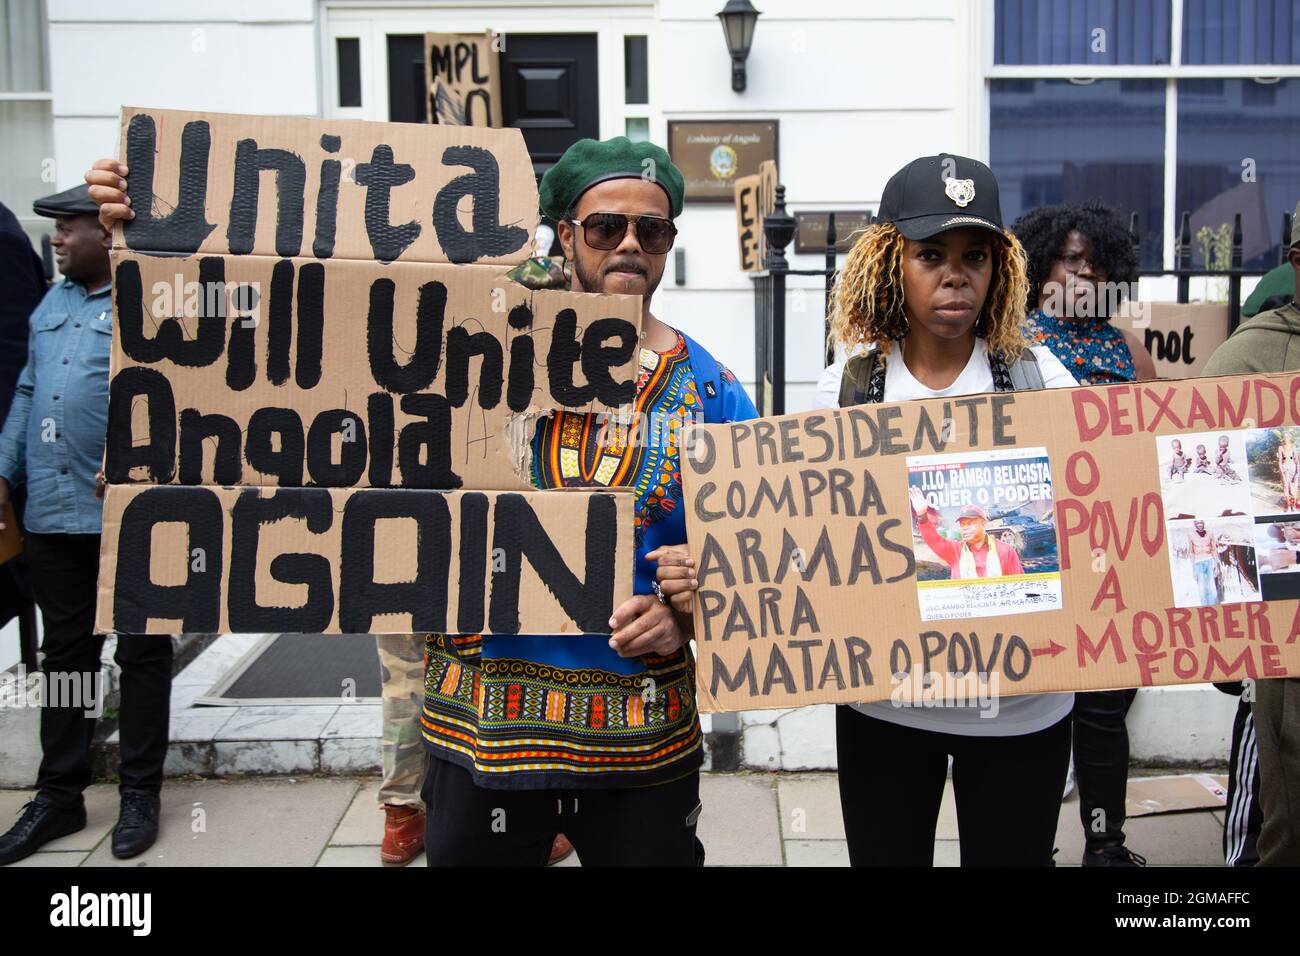 London, UK. 17th Sep, 2021. Protesters hold placards during the demonstration.Activists held a protest against the rise of human rights Abuse, pedophilia and corruption in Angola. (Photo by Thabo Jaiyesimi/SOPA Images/Sipa USA) Credit: Sipa USA/Alamy Live News Stock Photo